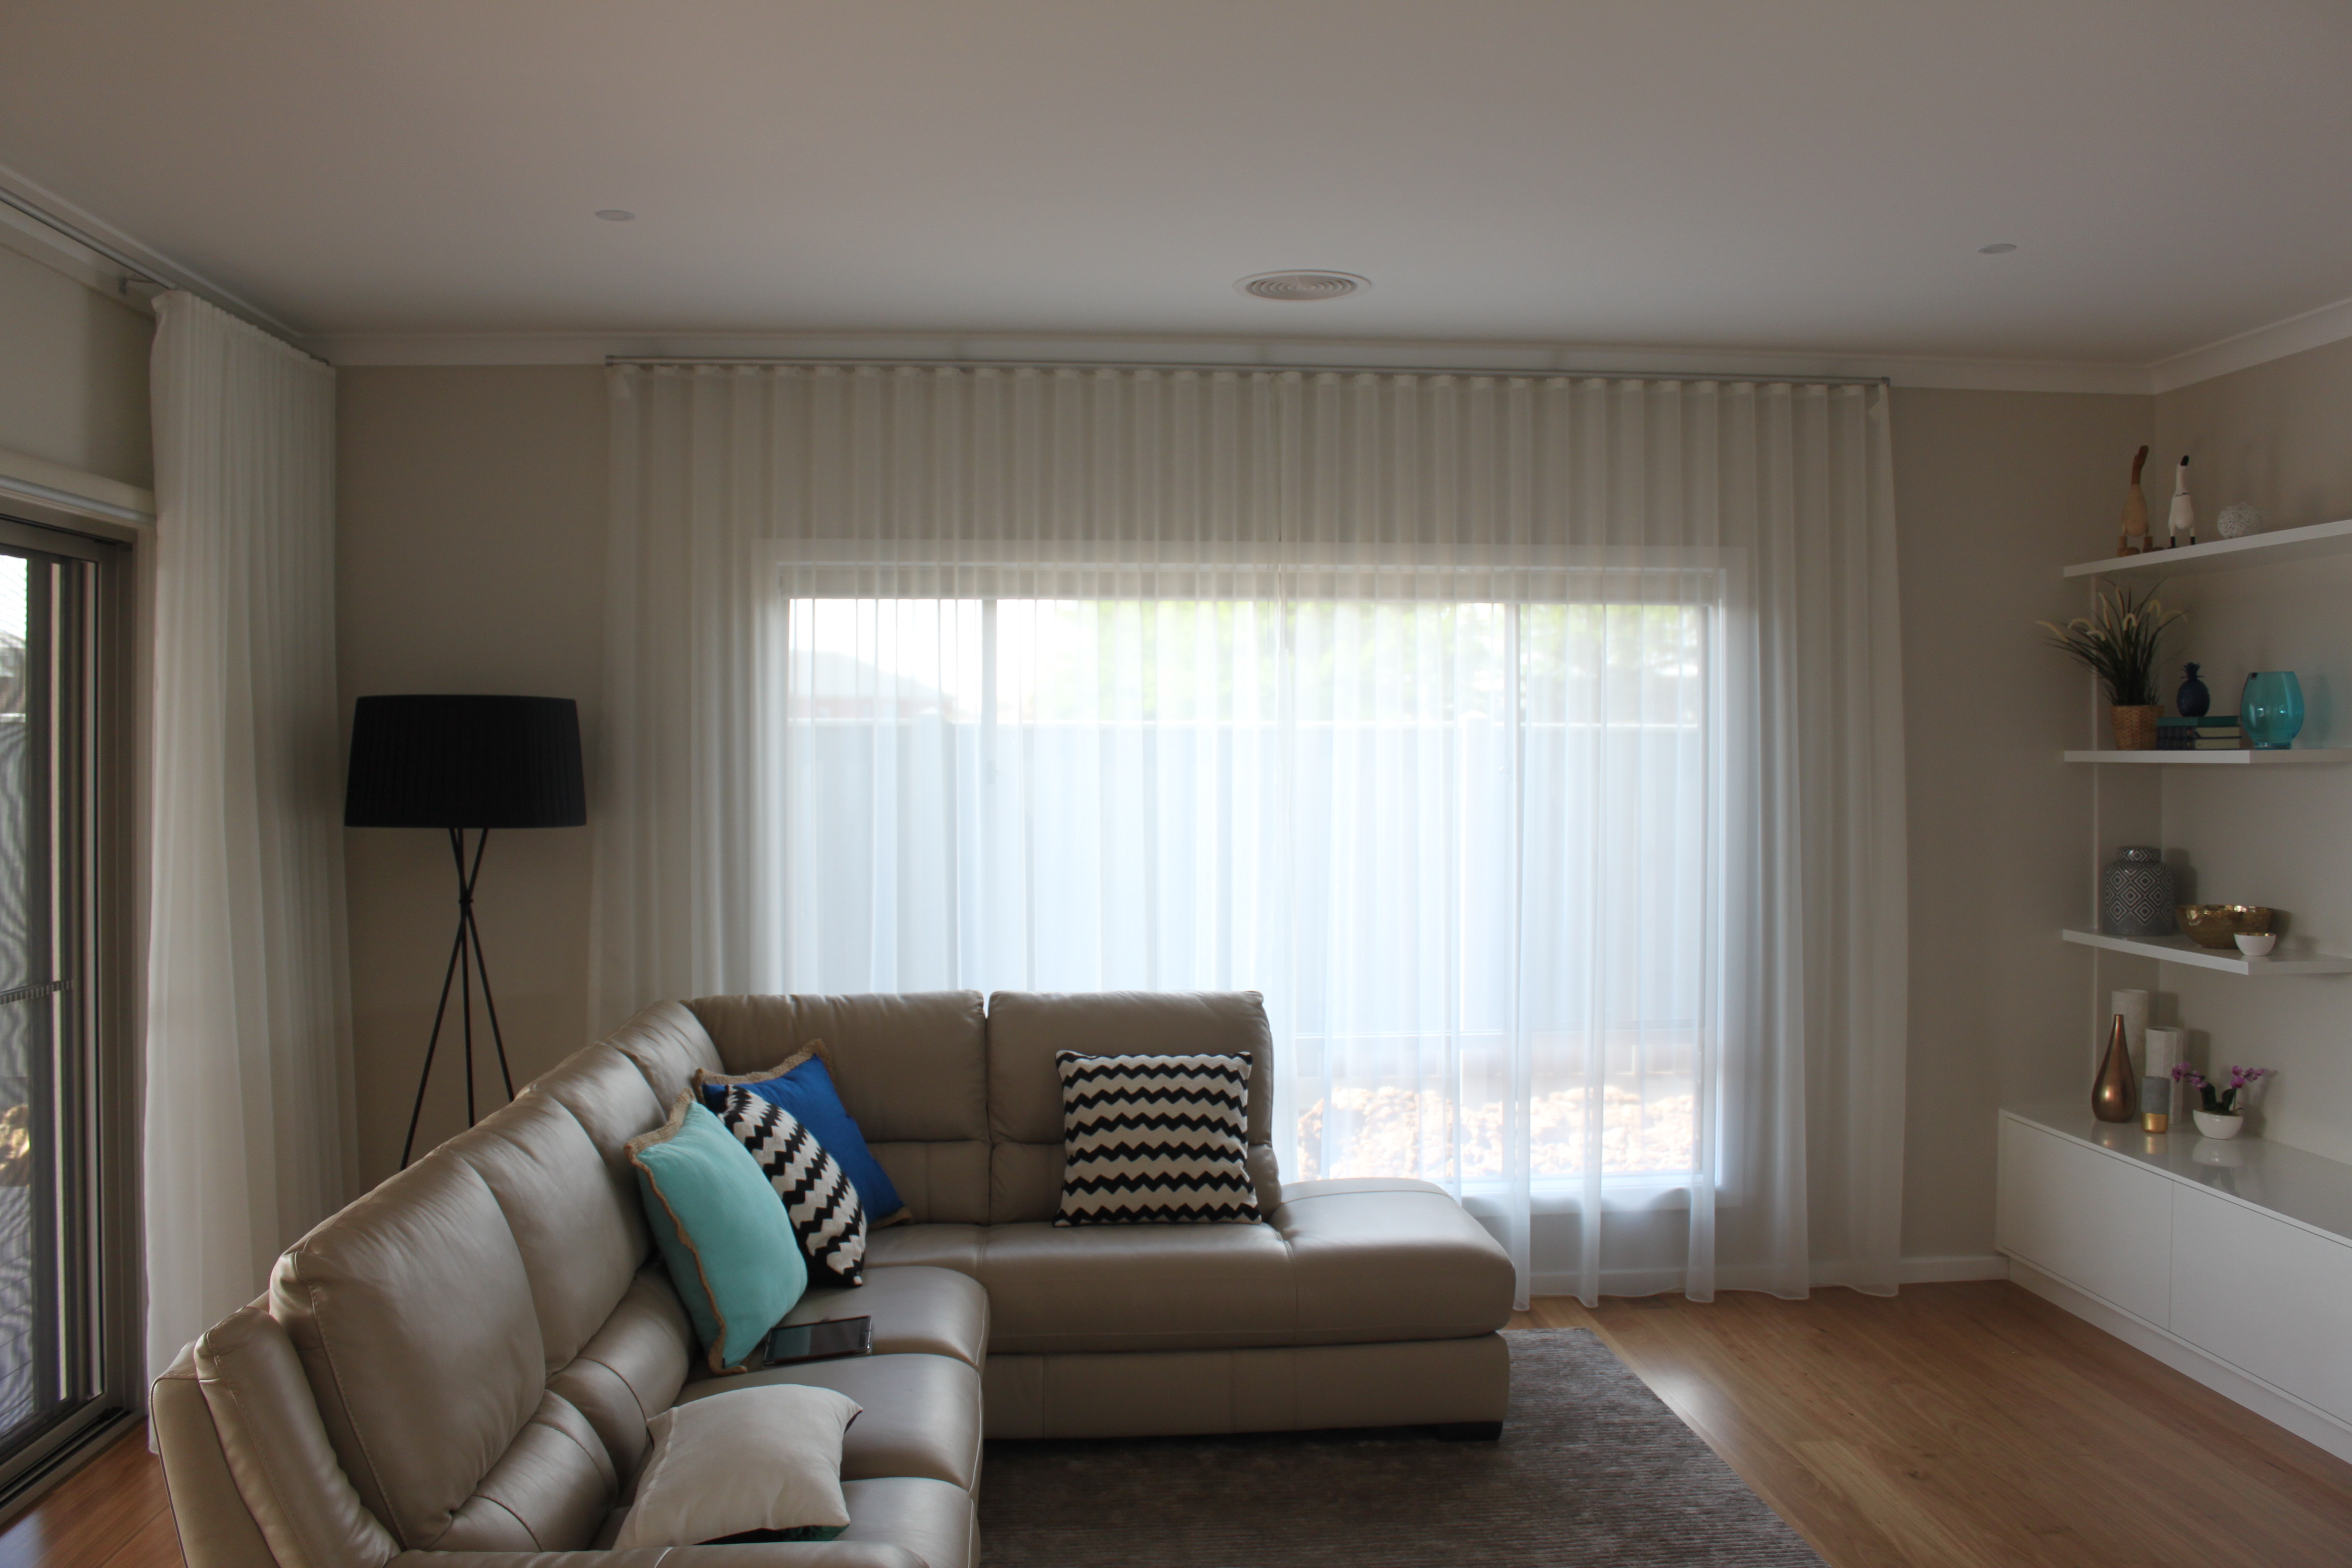 sheer curtians and roller blinds